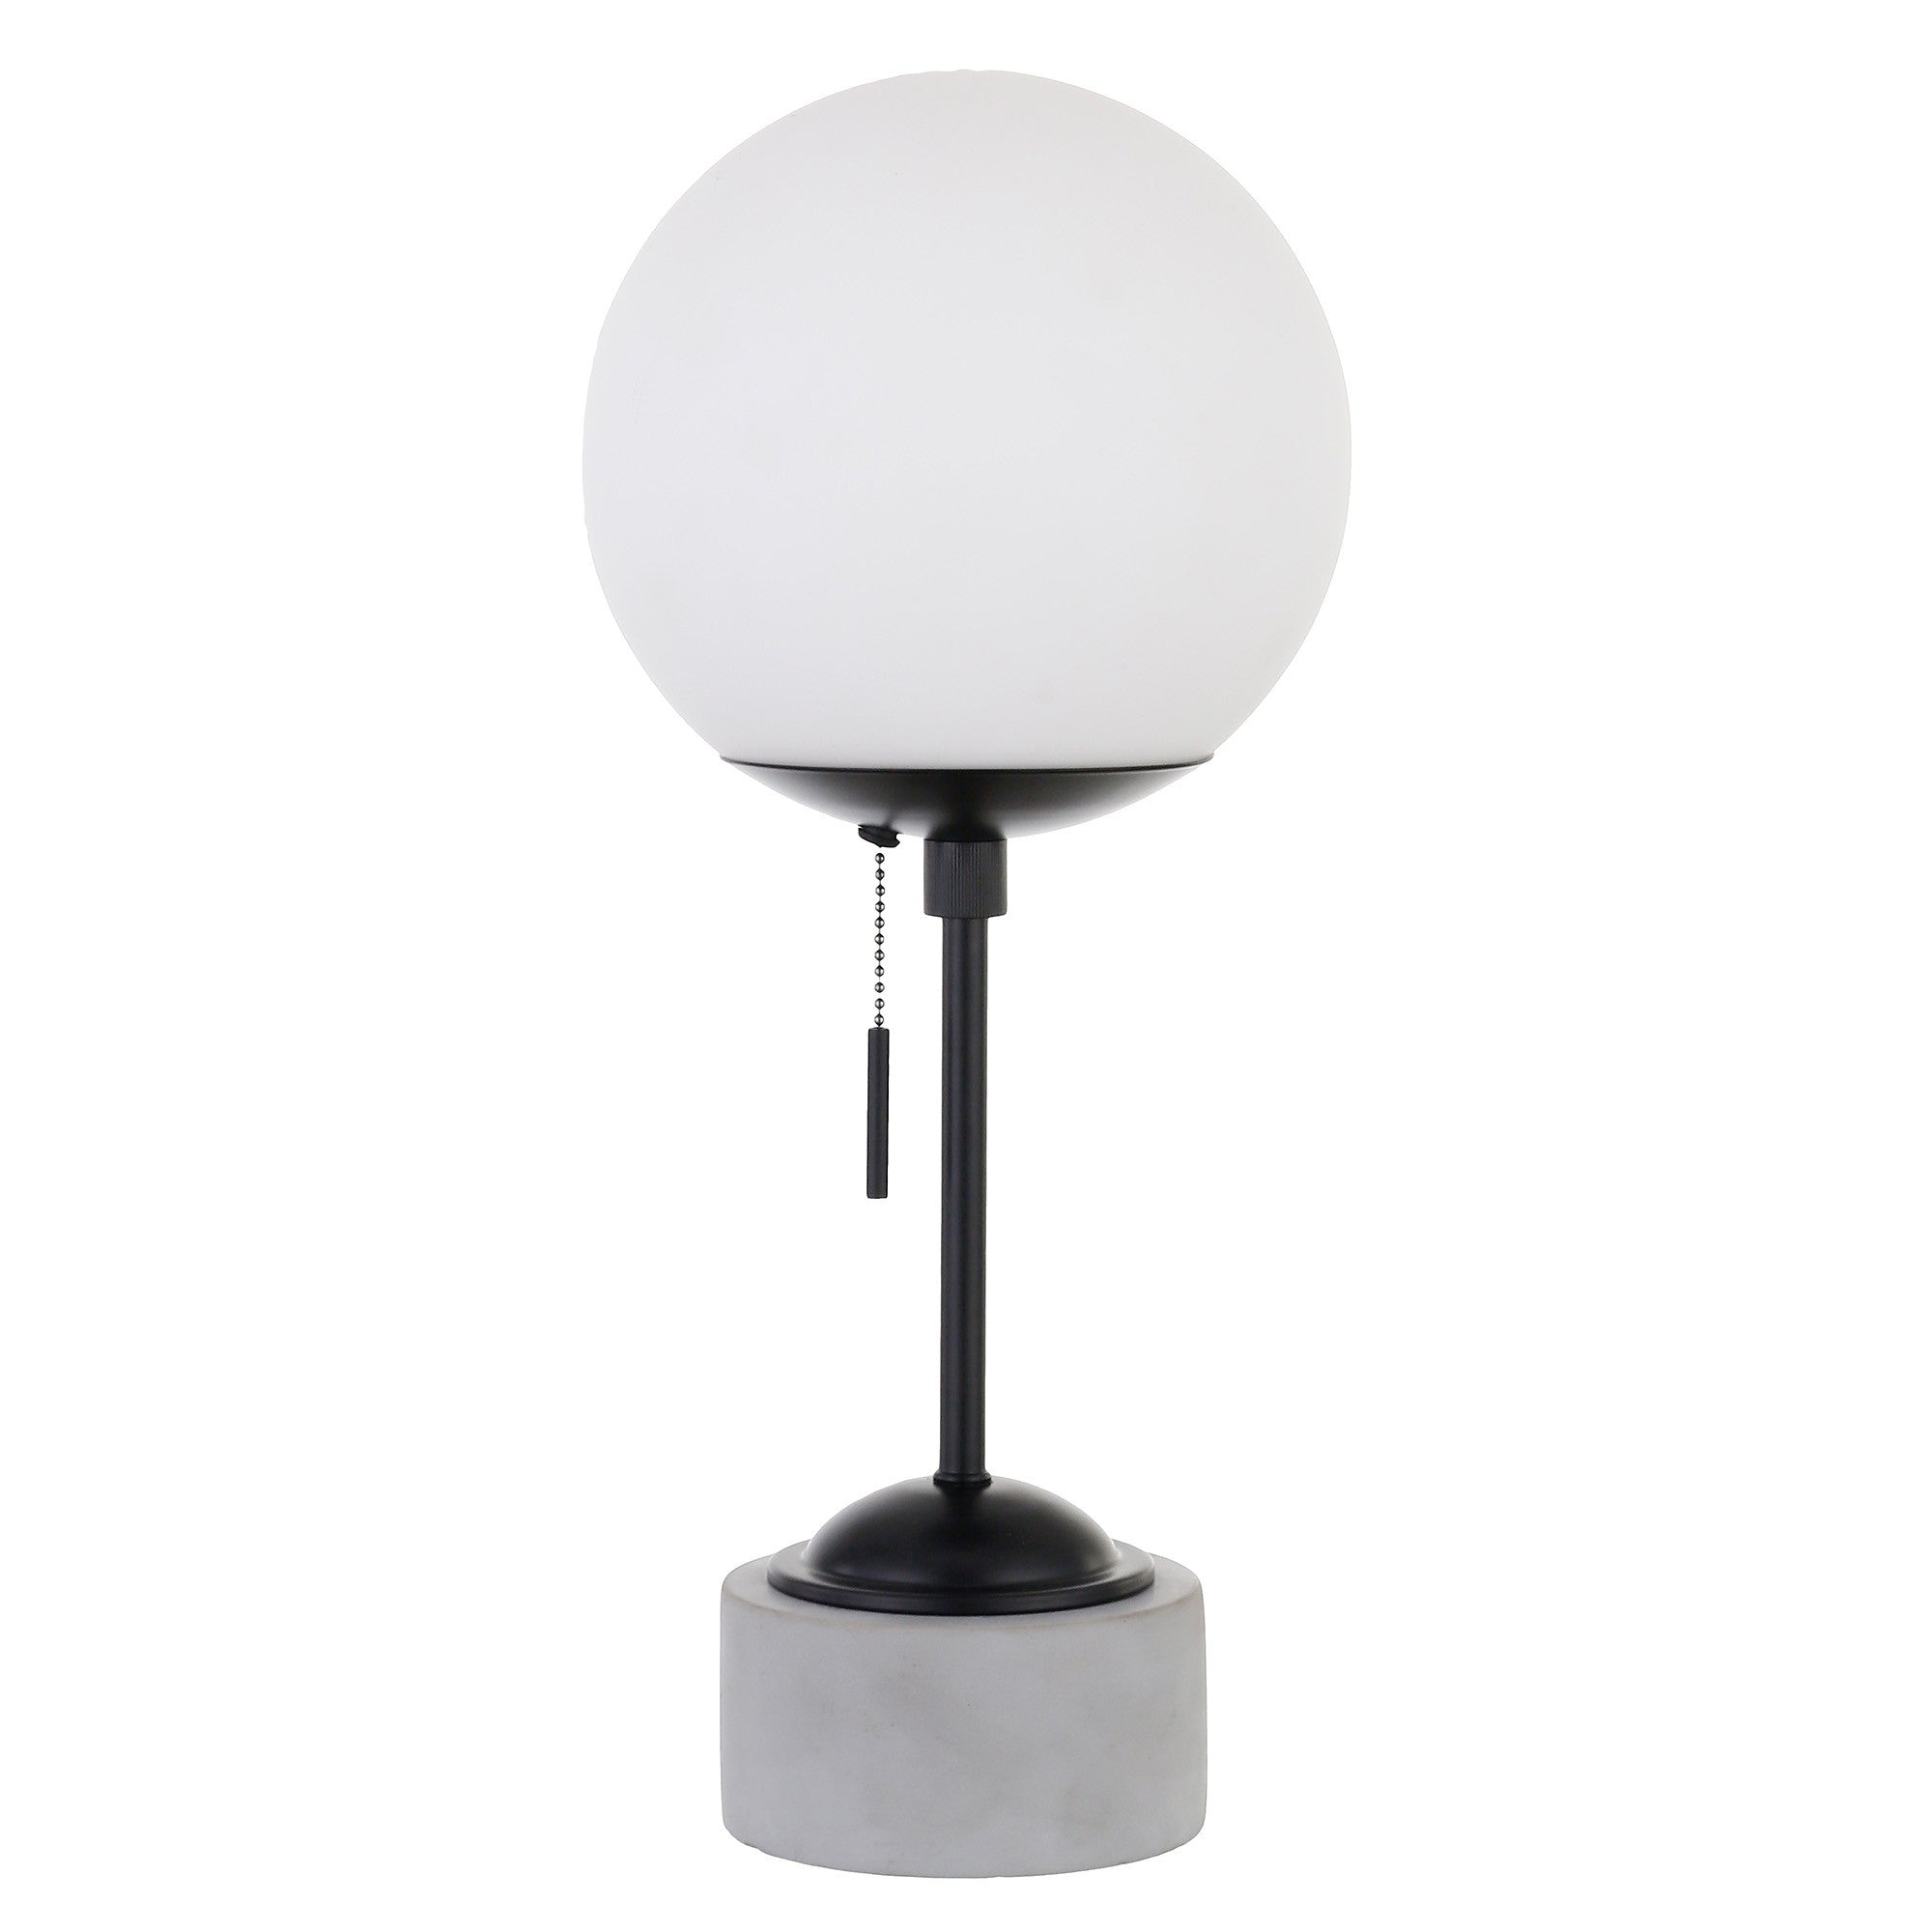 18" Gray and Black Concrete Globe Table Lamp With White Globe Shade